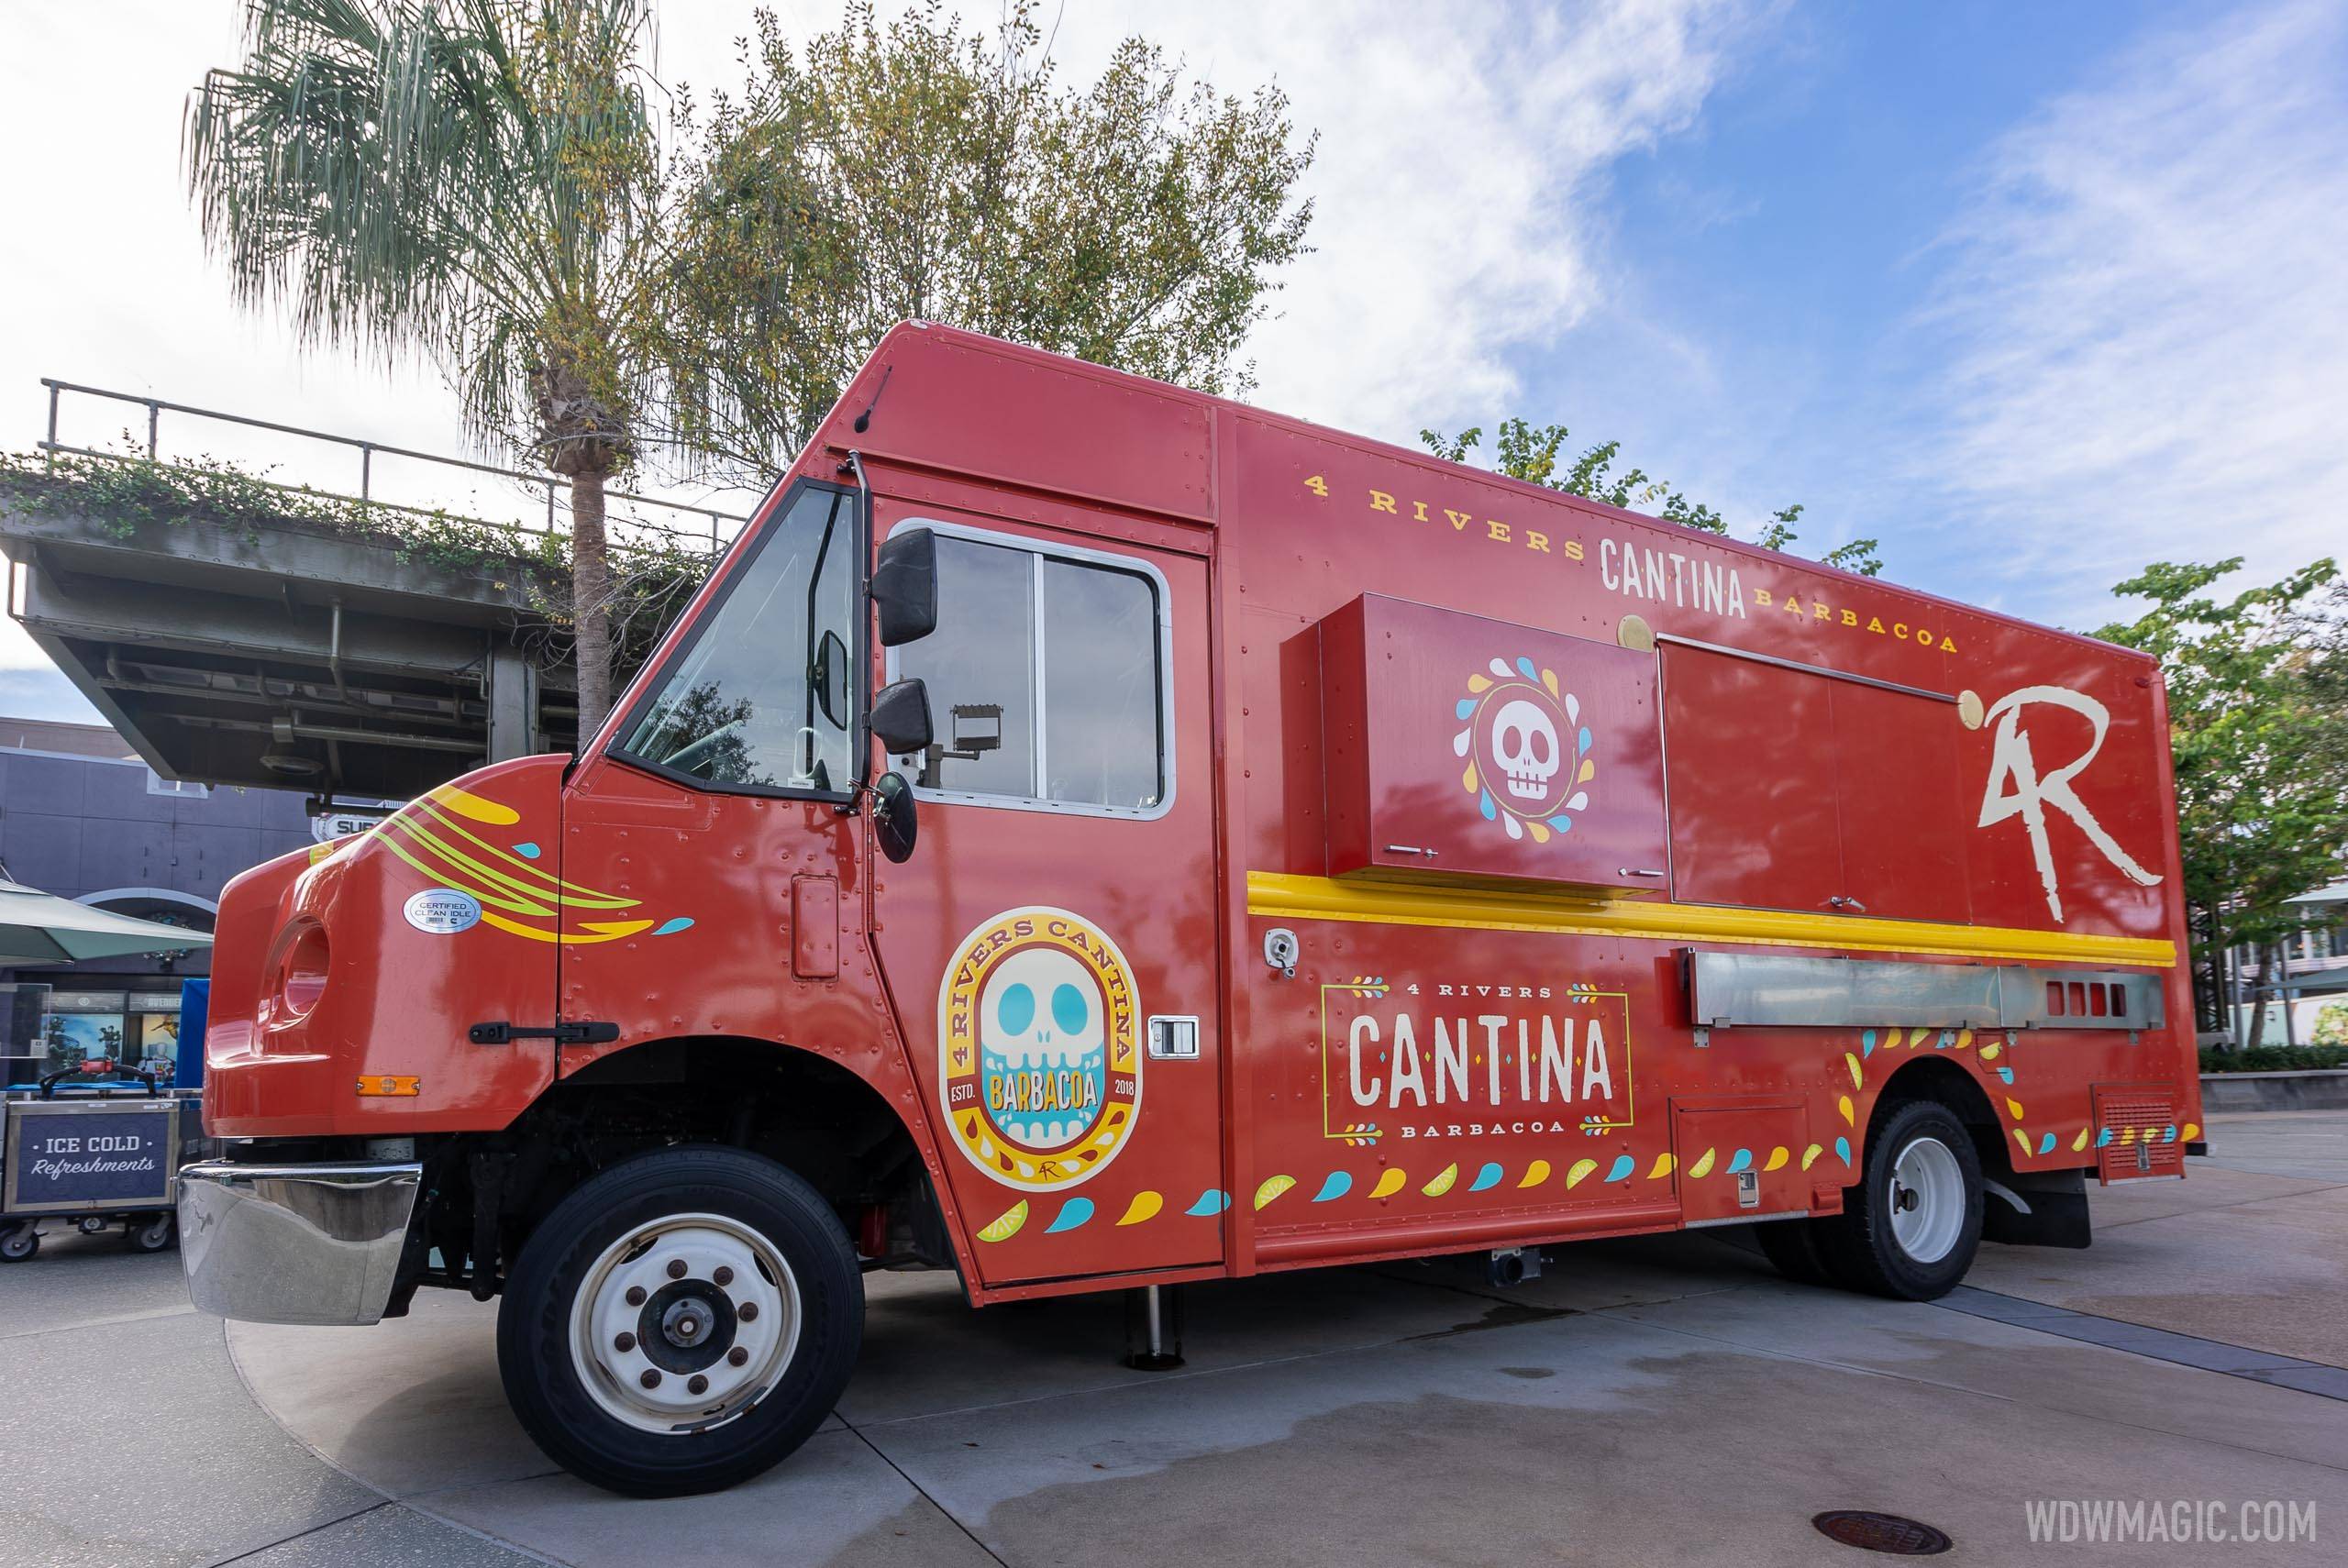 4 Rivers Cantina Barbacoa Food Truck returns to Disney Springs in new location